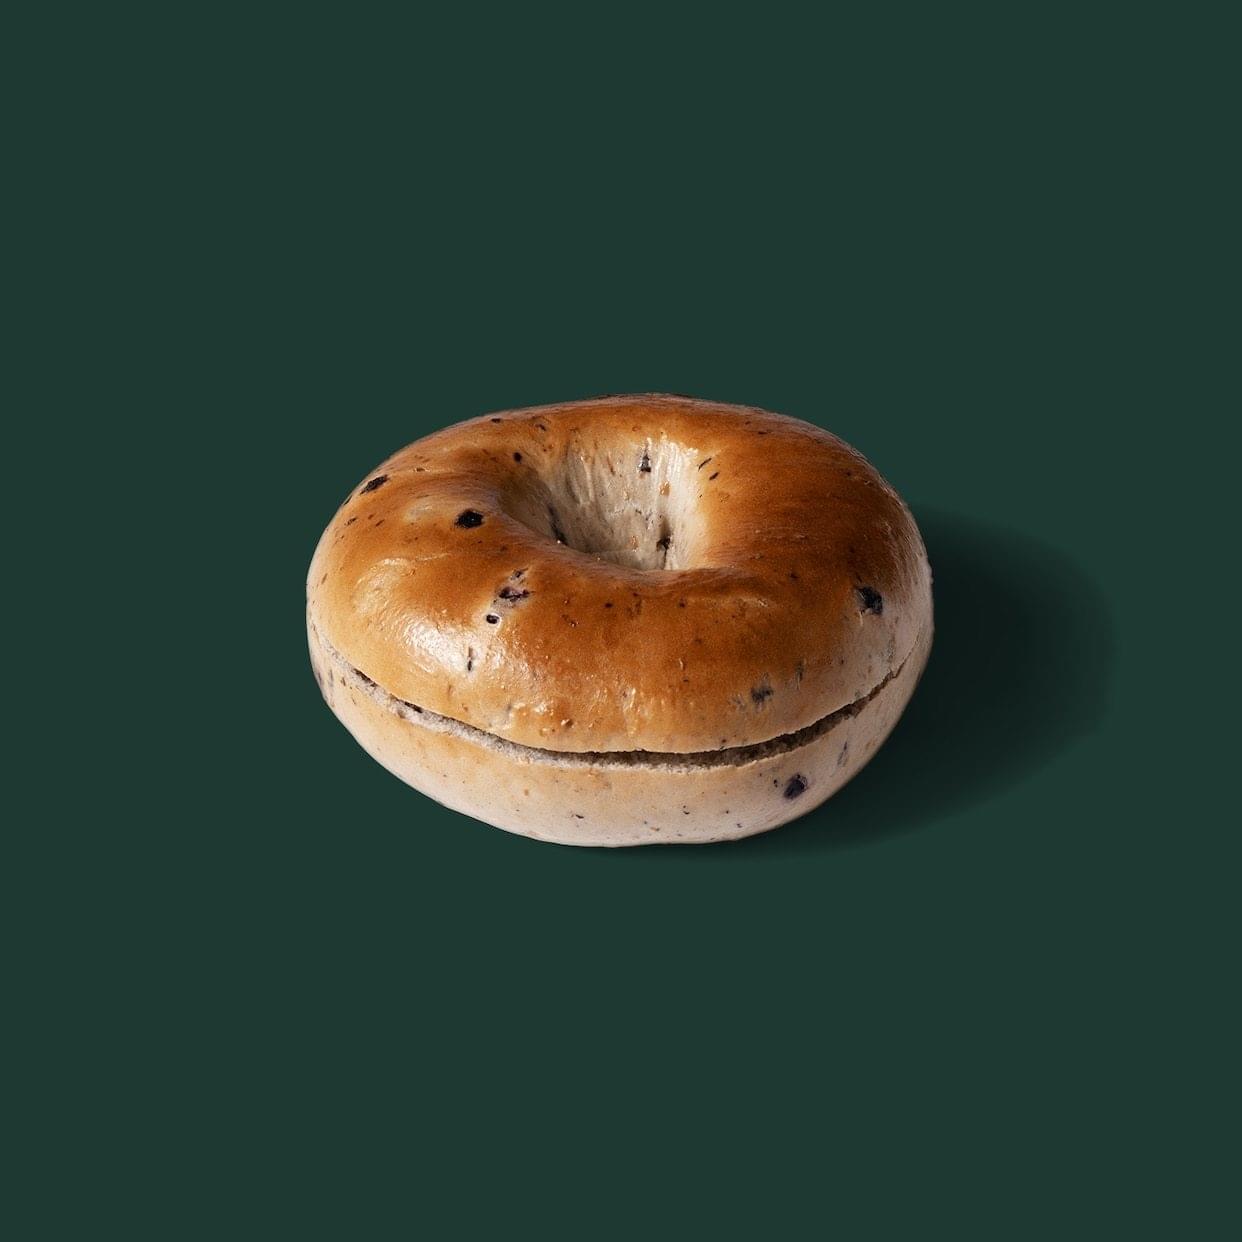 Starbucks Blueberry Bagel Nutrition Facts